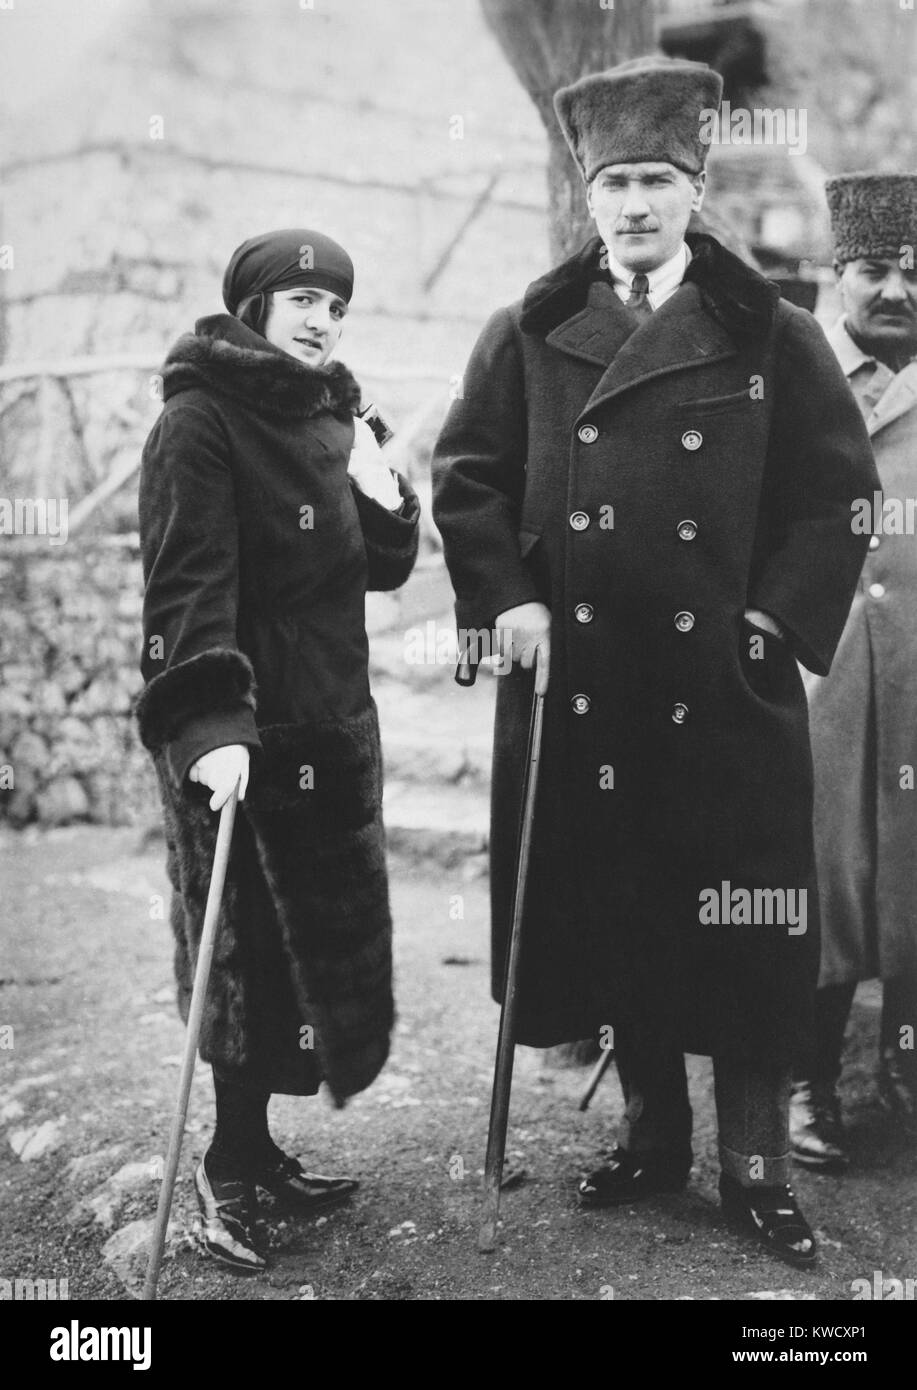 Kemal Ataturk, President of Turkey and his wife, Latife Hanouz, in 1923. She appeared publically with her husband and encouraged women to participate in public life. The couple divorced in 1925 due to incompatibility (BSLOC 2017 1 115) Stock Photo